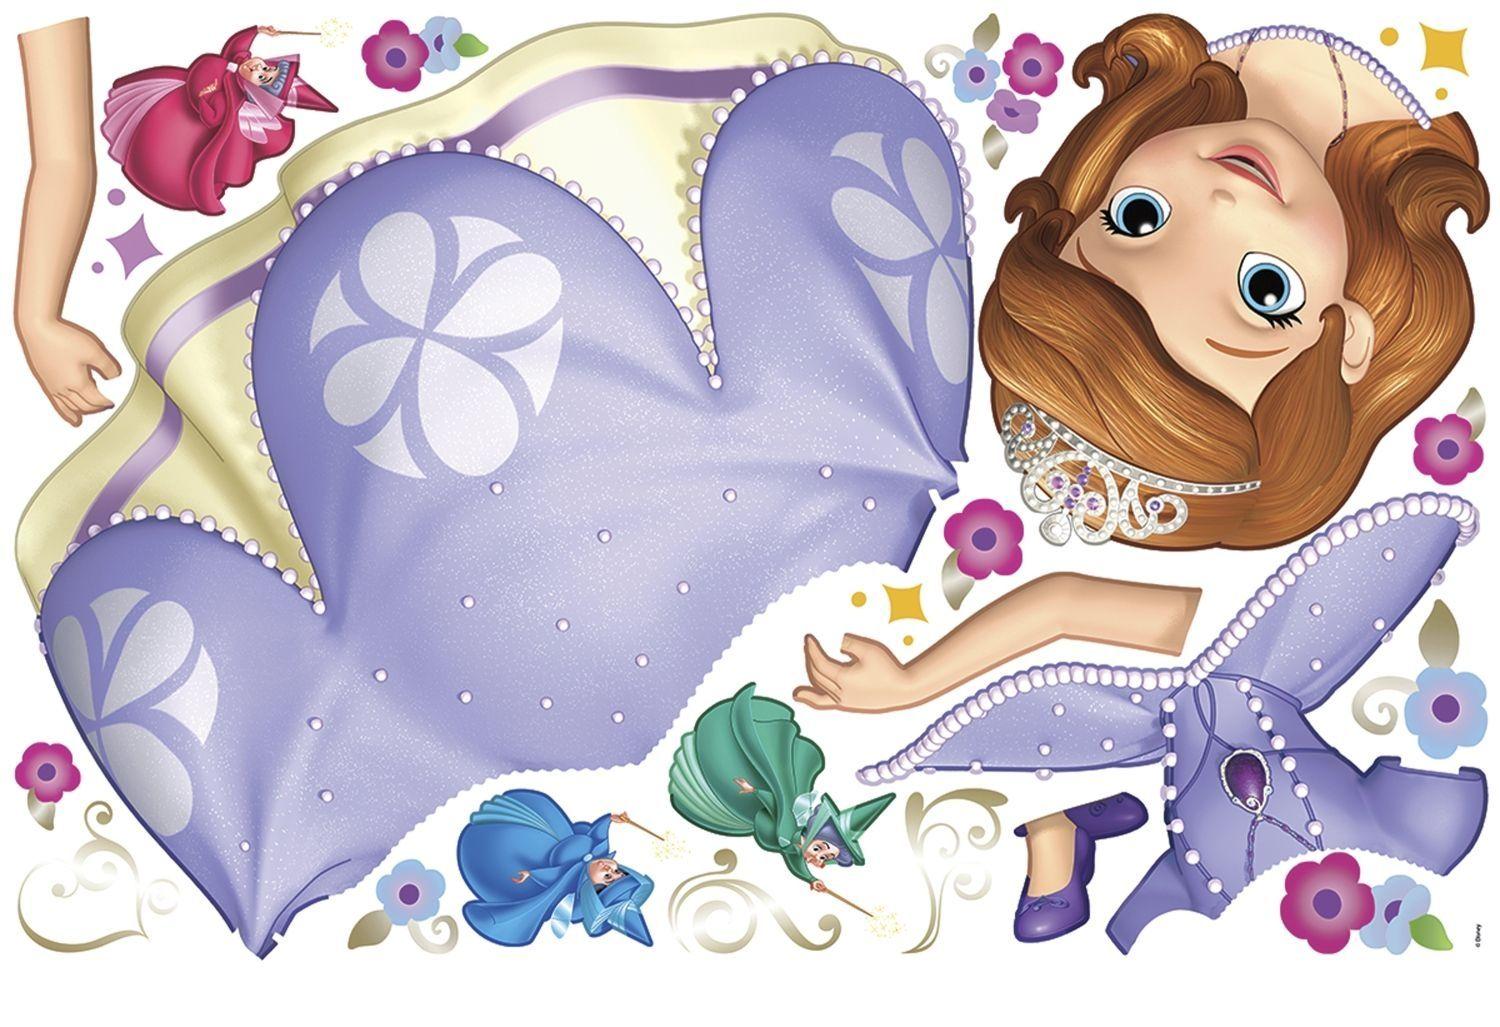 Sofia The First Dancingsbunny Sofia The First